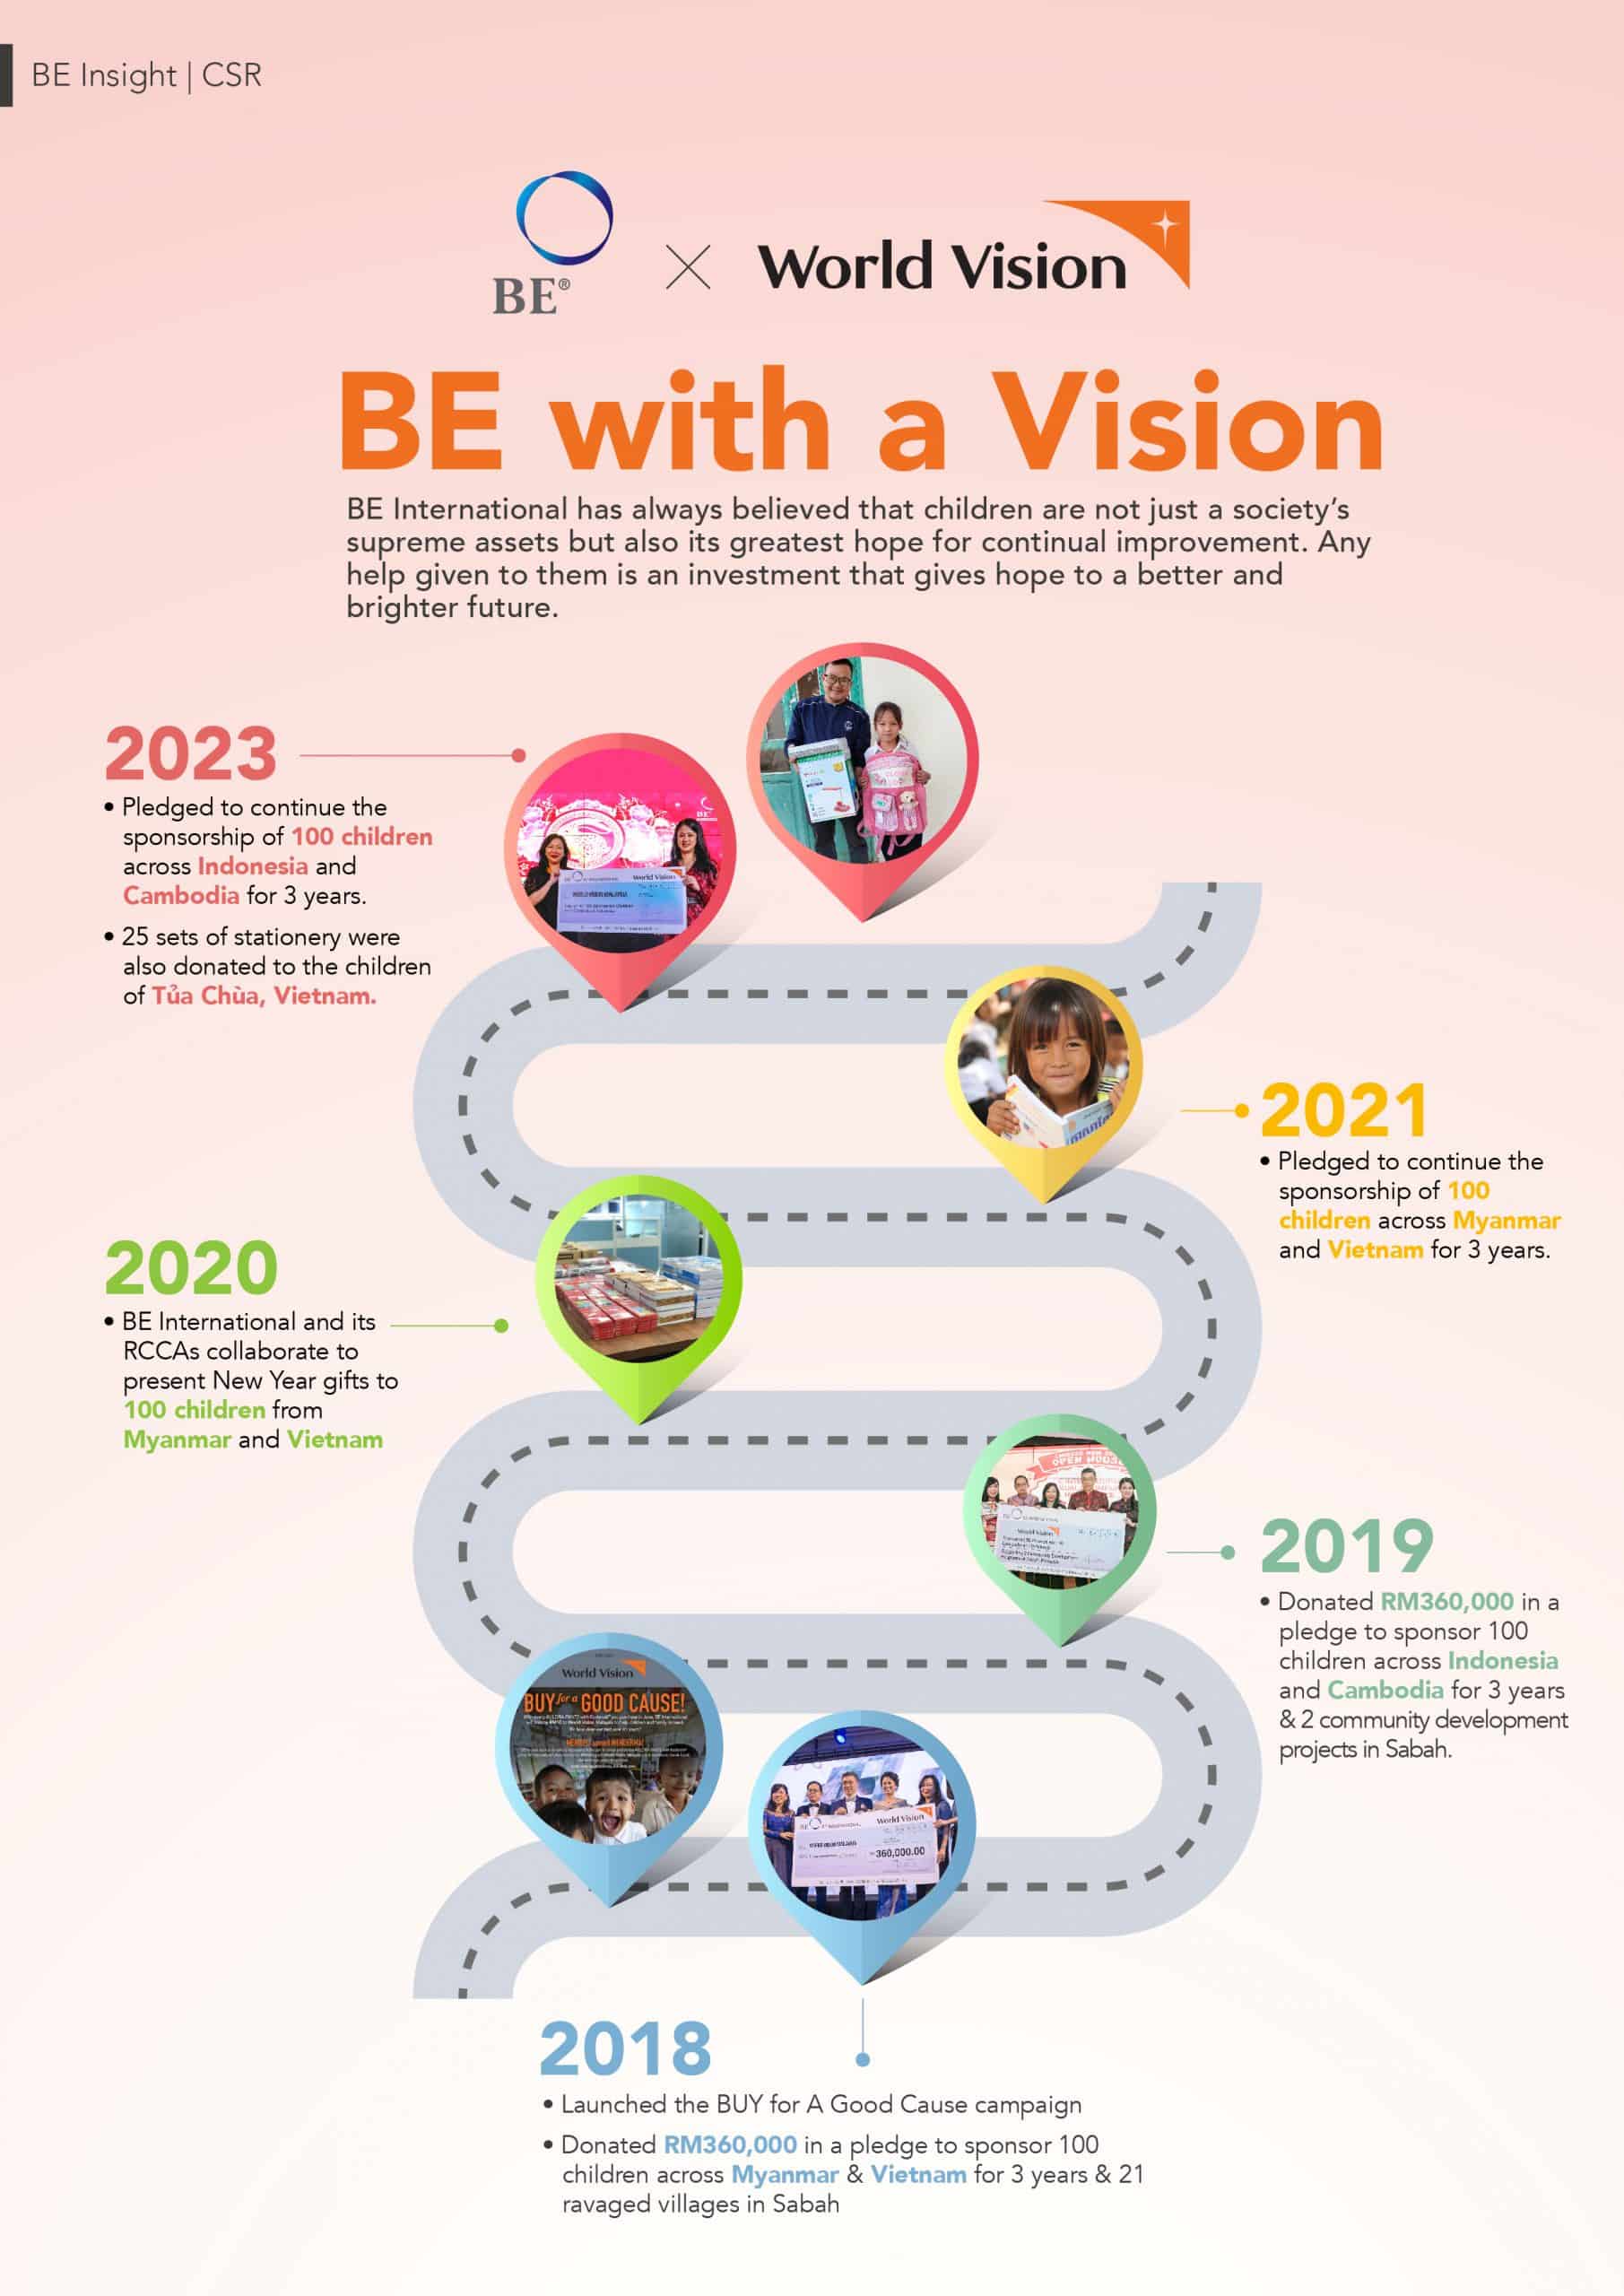 BE with a Vision [BE International X World Vision]